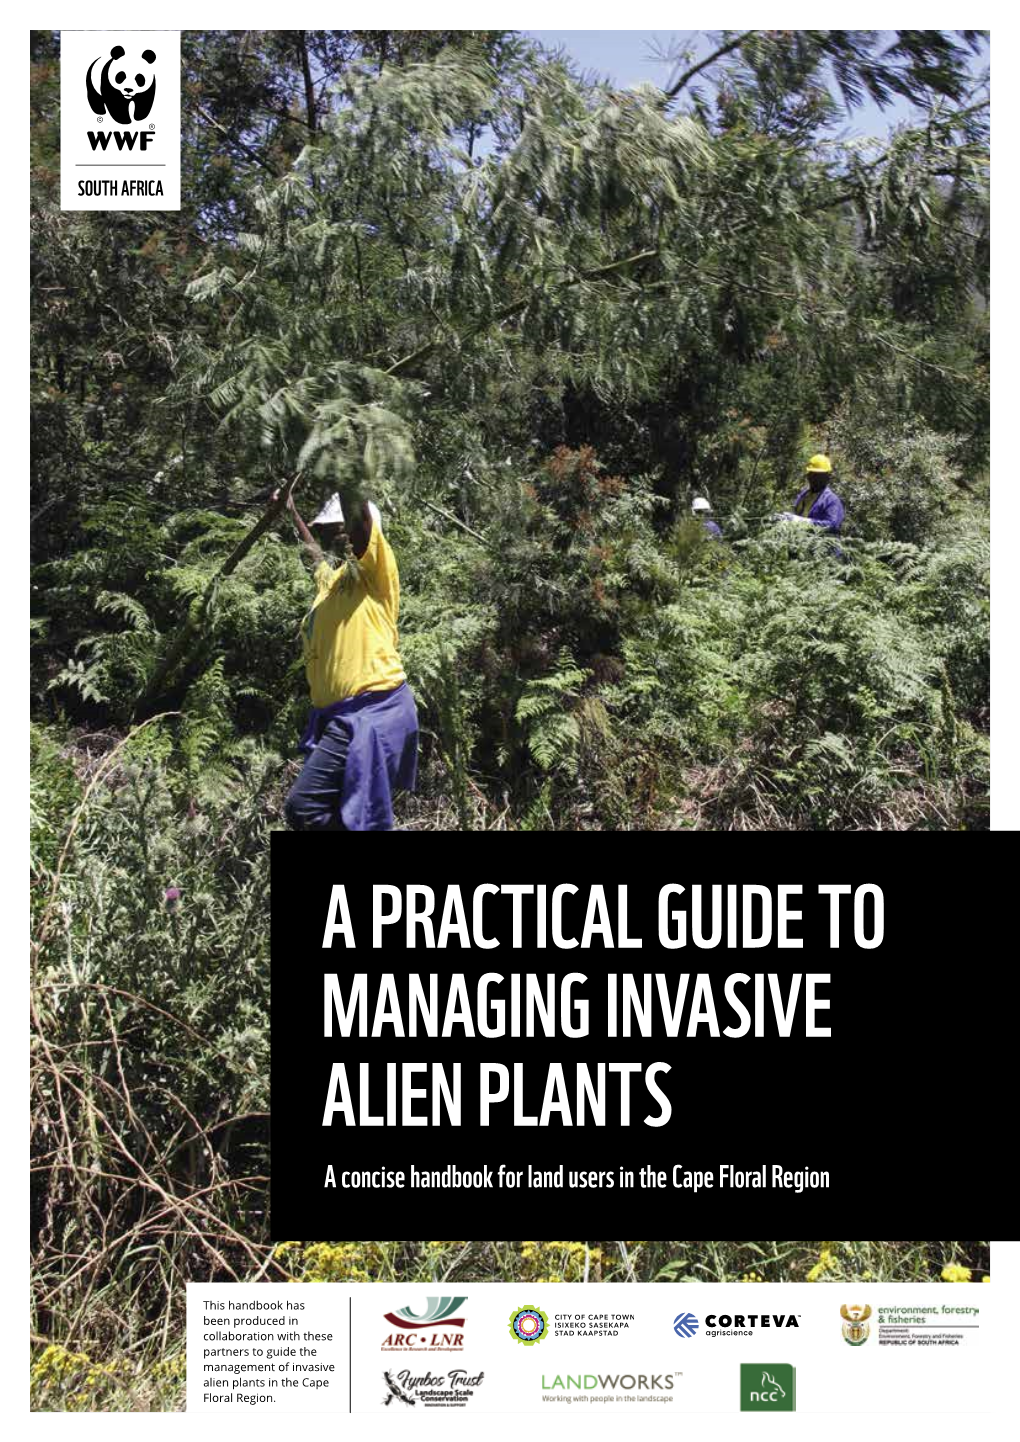 A PRACTICAL GUIDE to MANAGING INVASIVE ALIEN PLANTS a Concise Handbook for Land Users in the Cape Floral Region